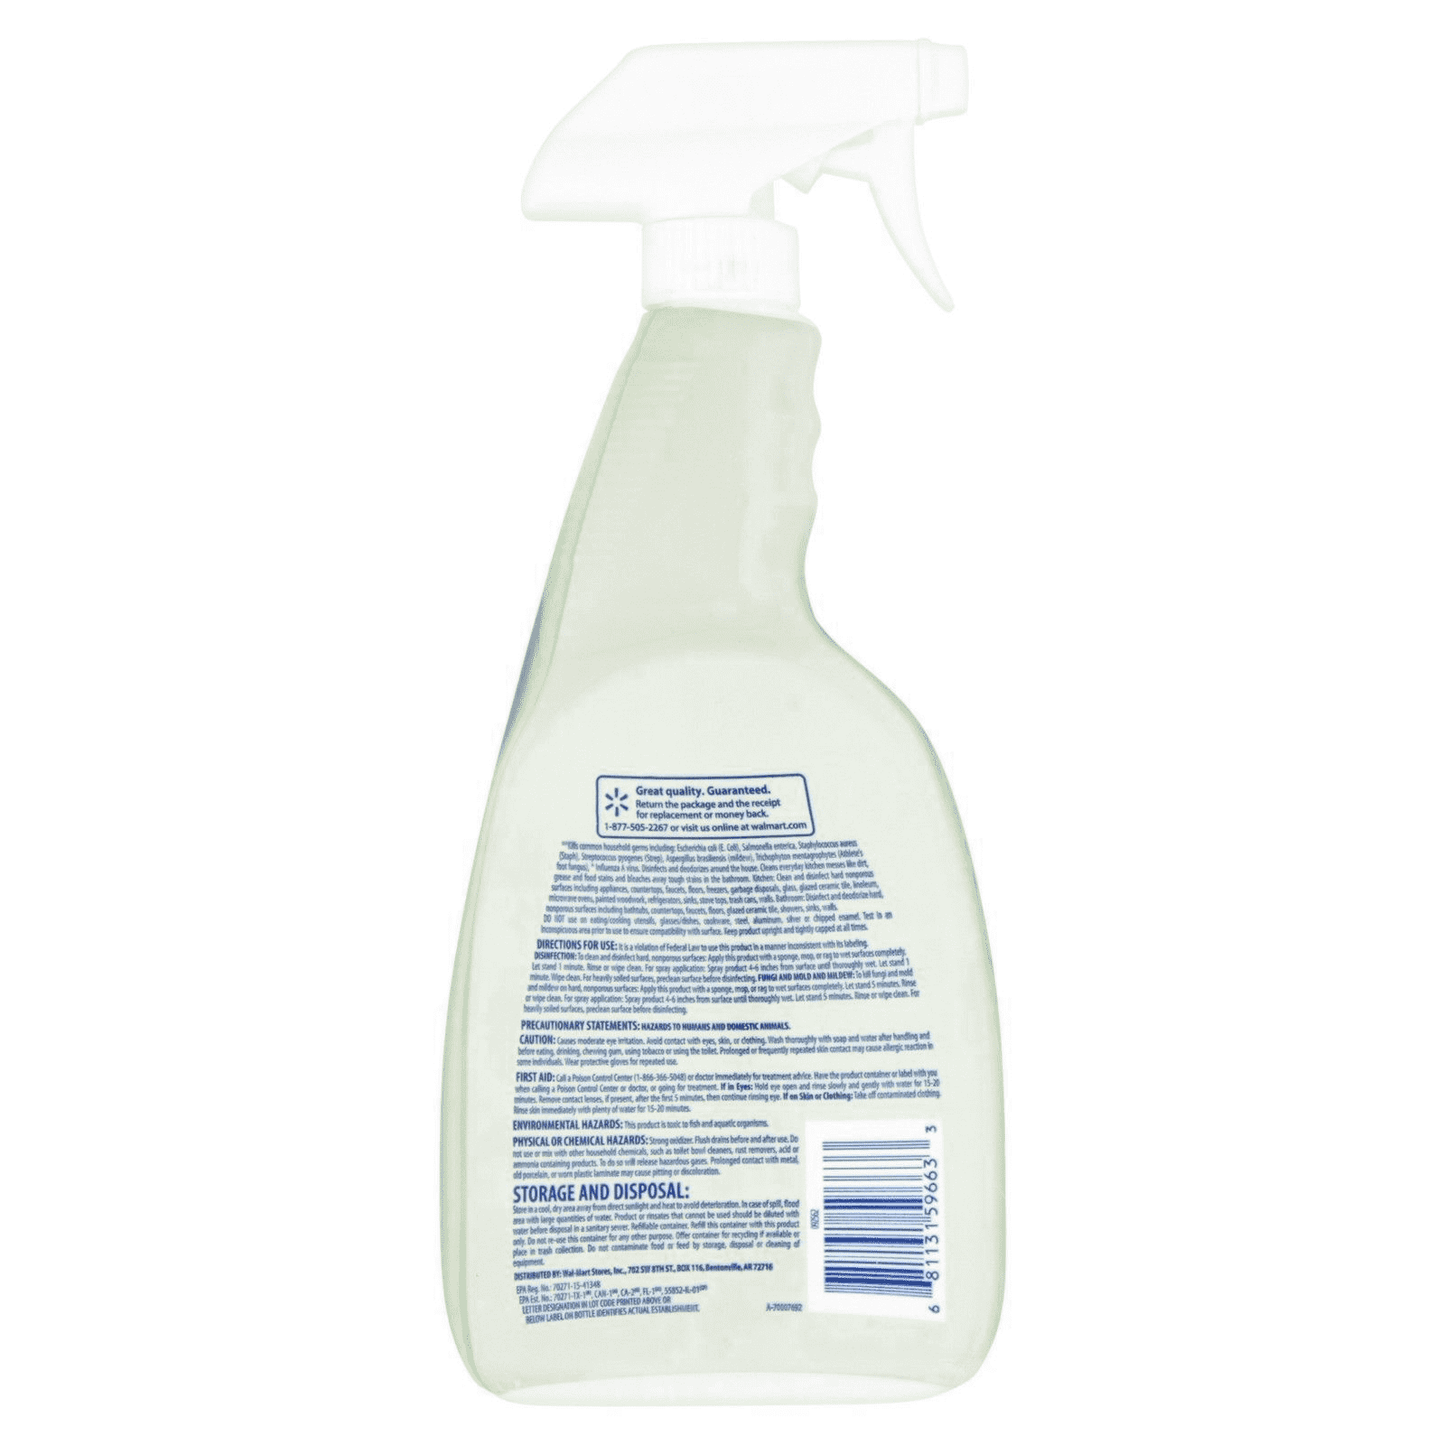 All Purpose Cleaner with Bleach 32 fl oz by Great Value